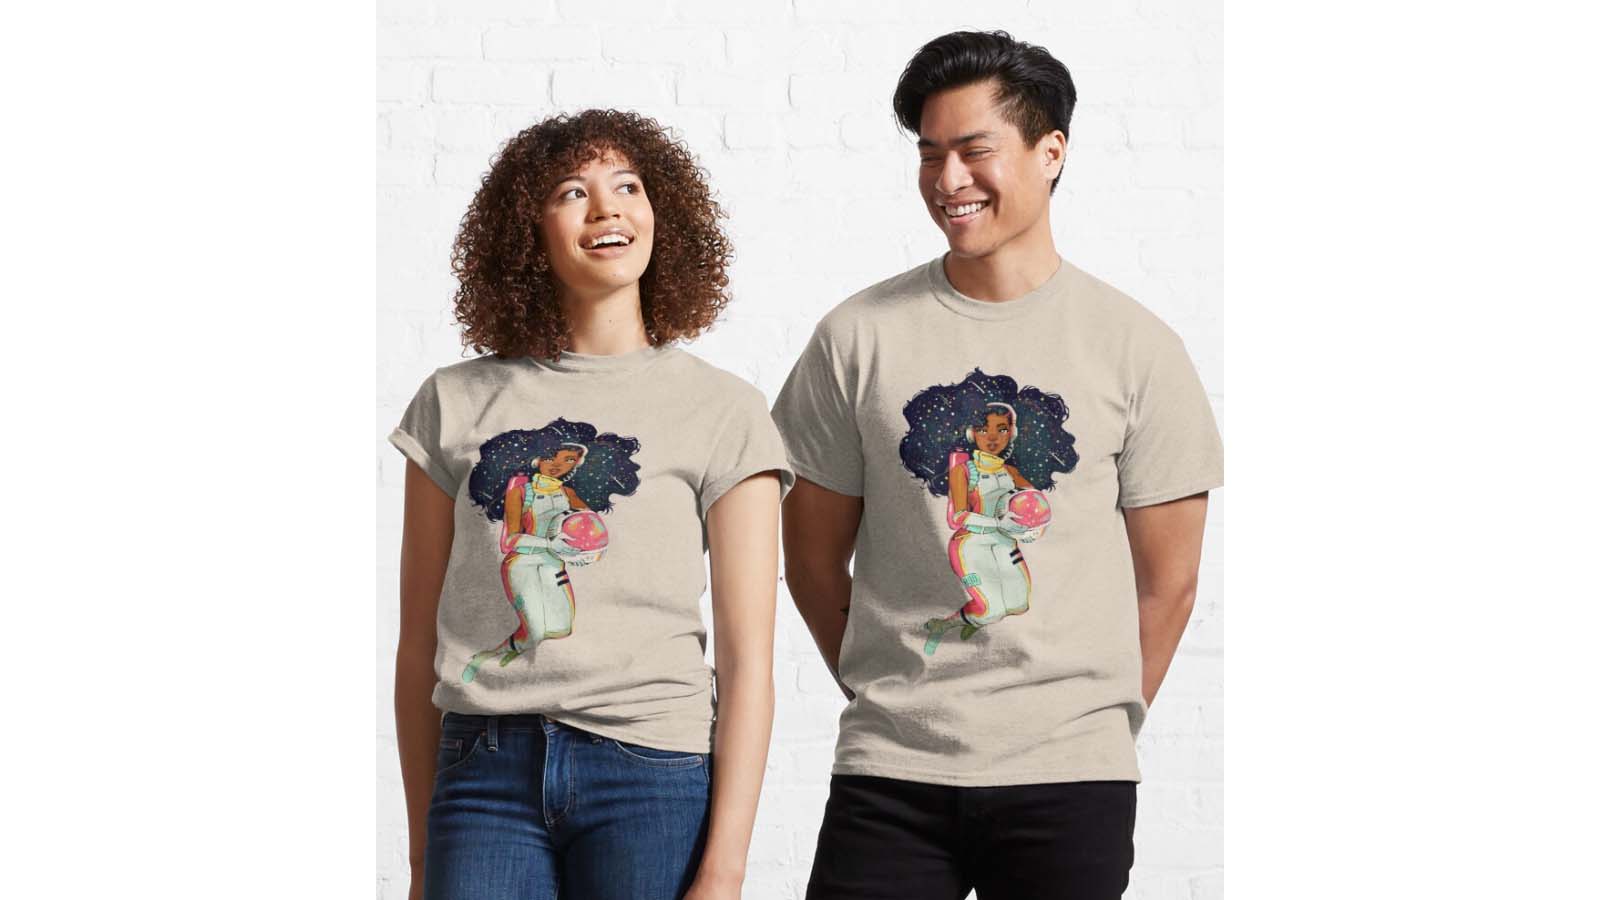 Shop Redbubble: Get the best designed t-shirts made by independent artists